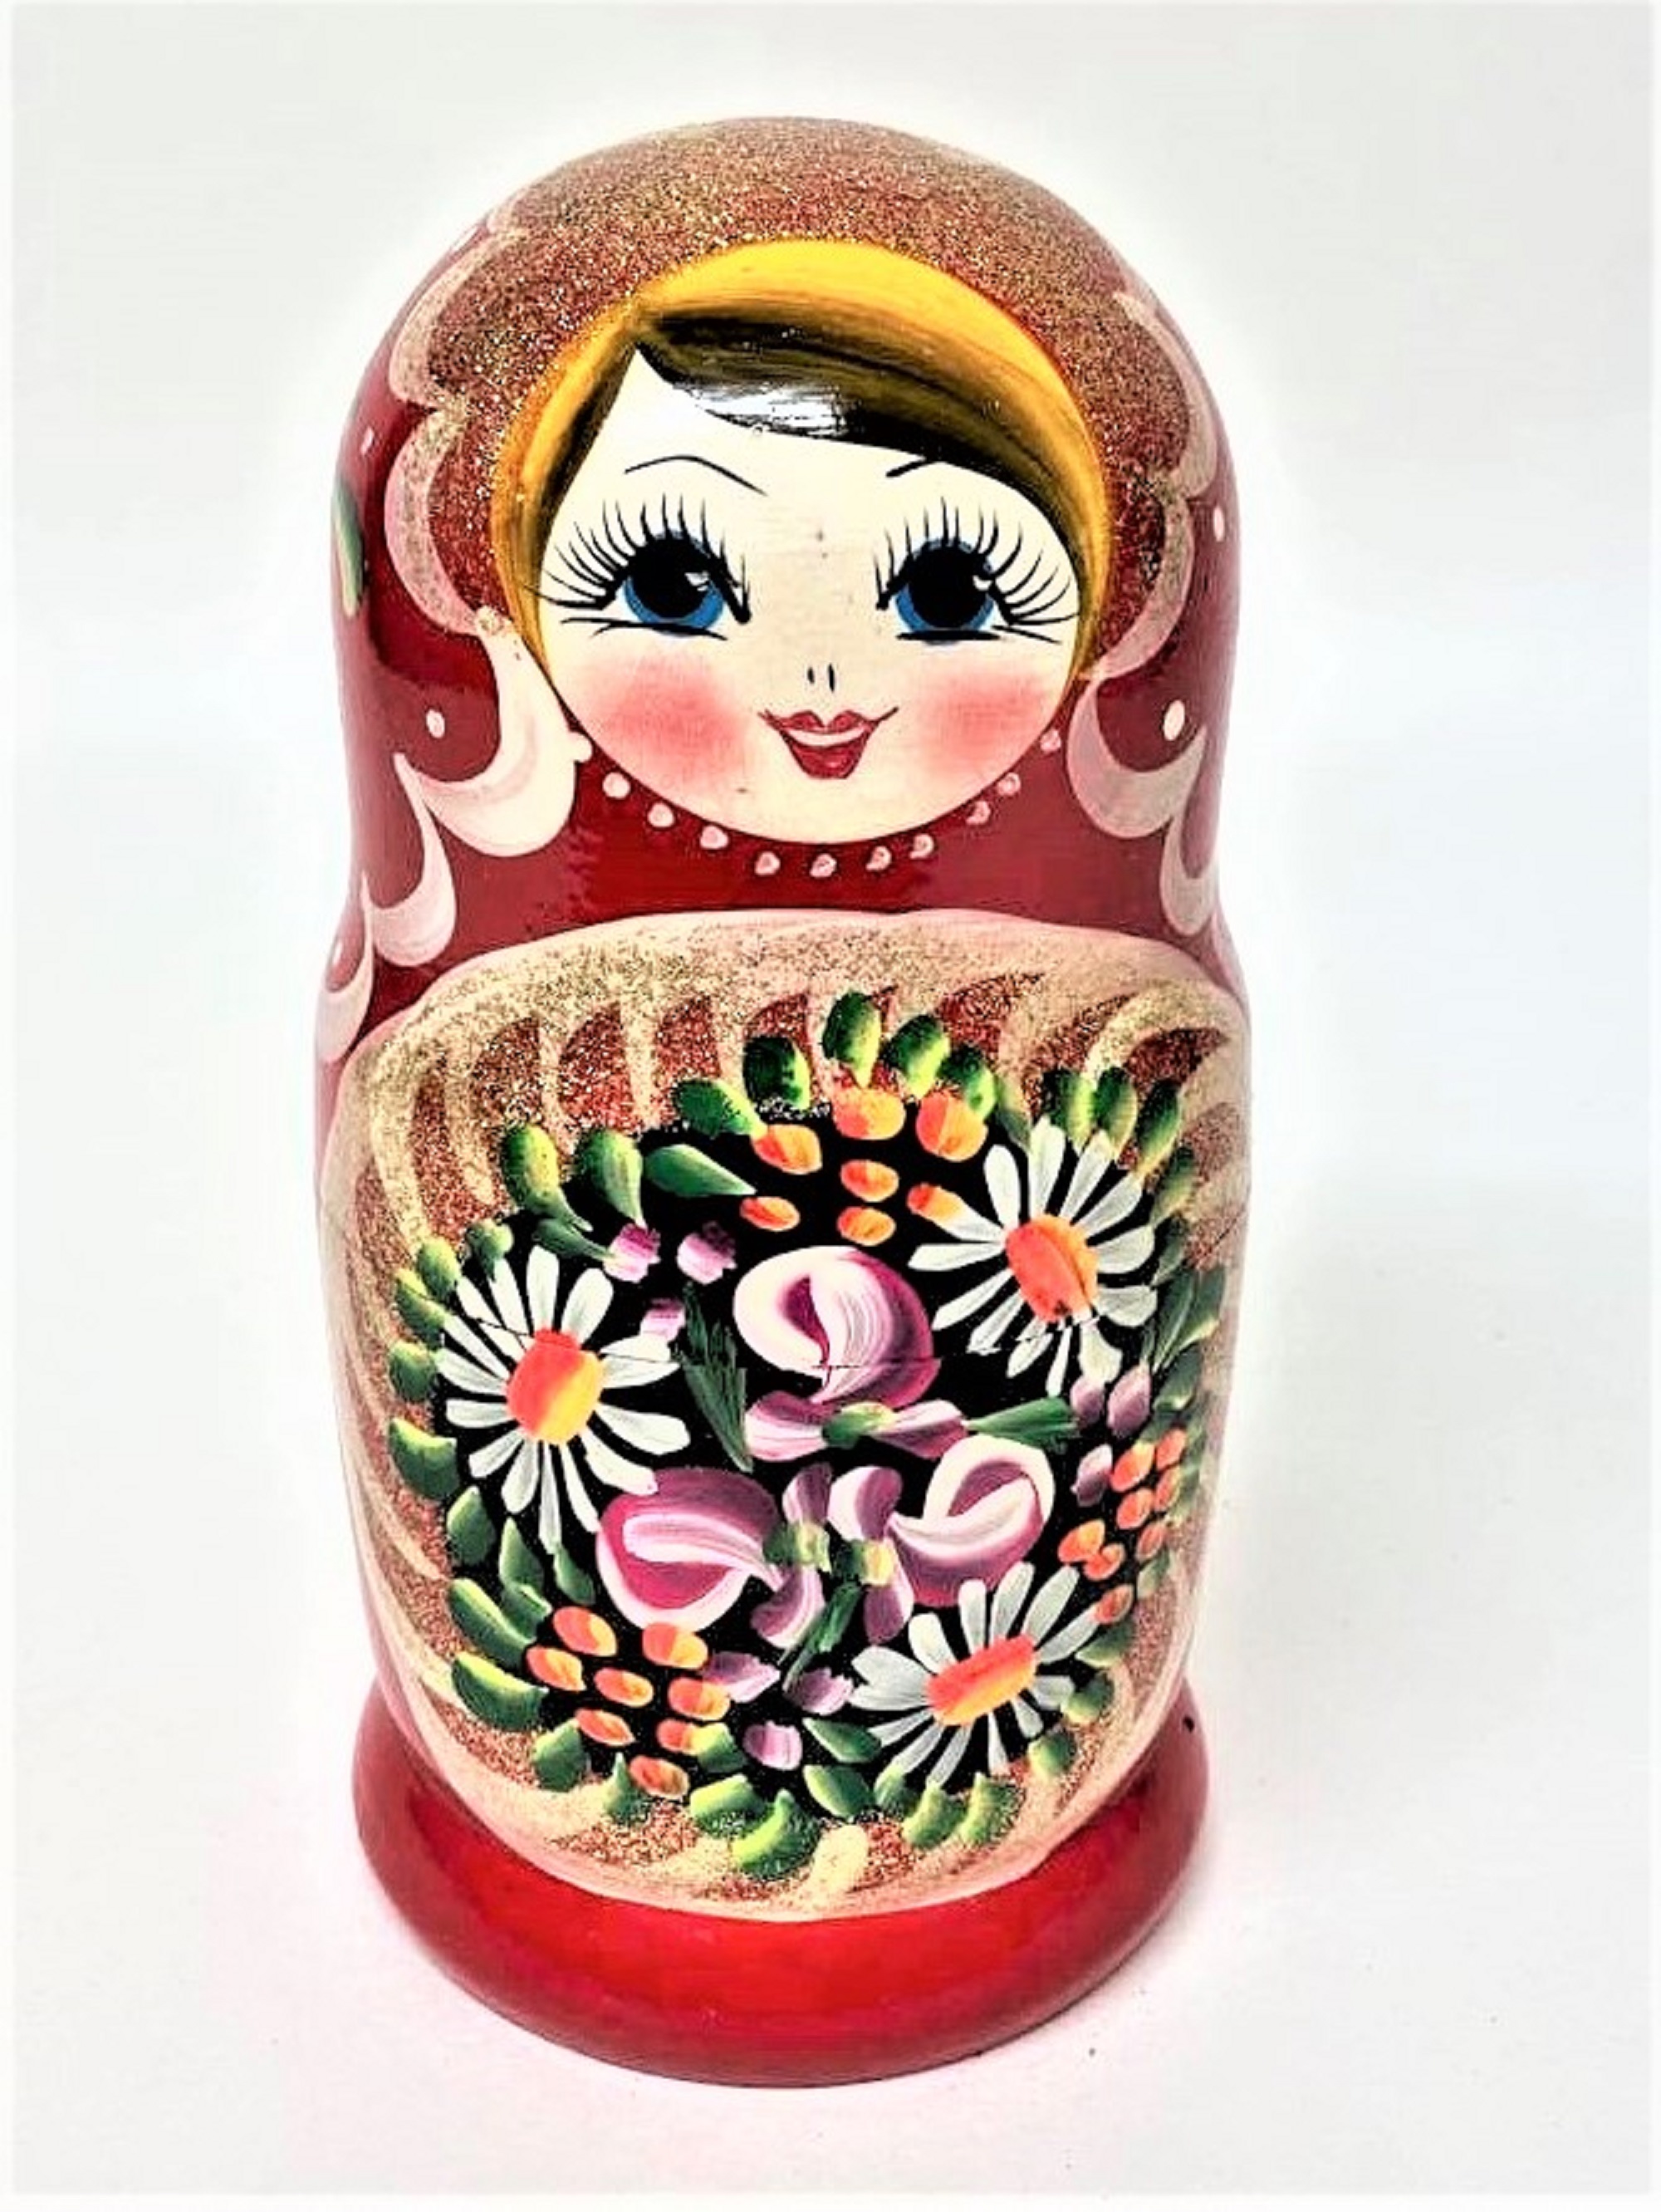 Russian painted dolls